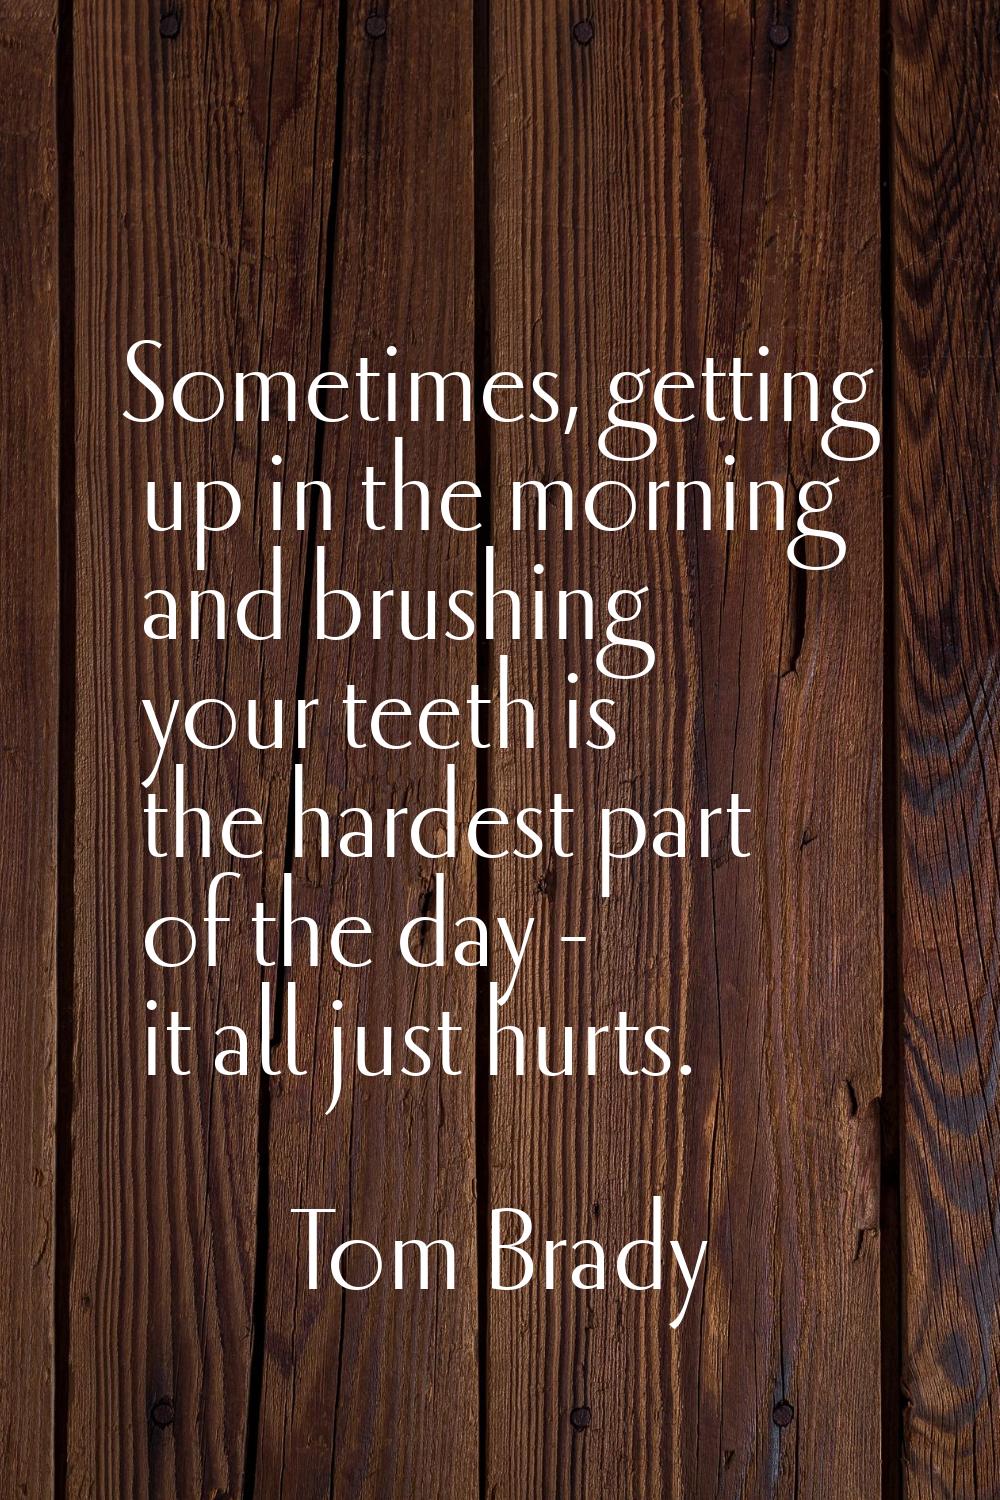 Sometimes, getting up in the morning and brushing your teeth is the hardest part of the day - it al